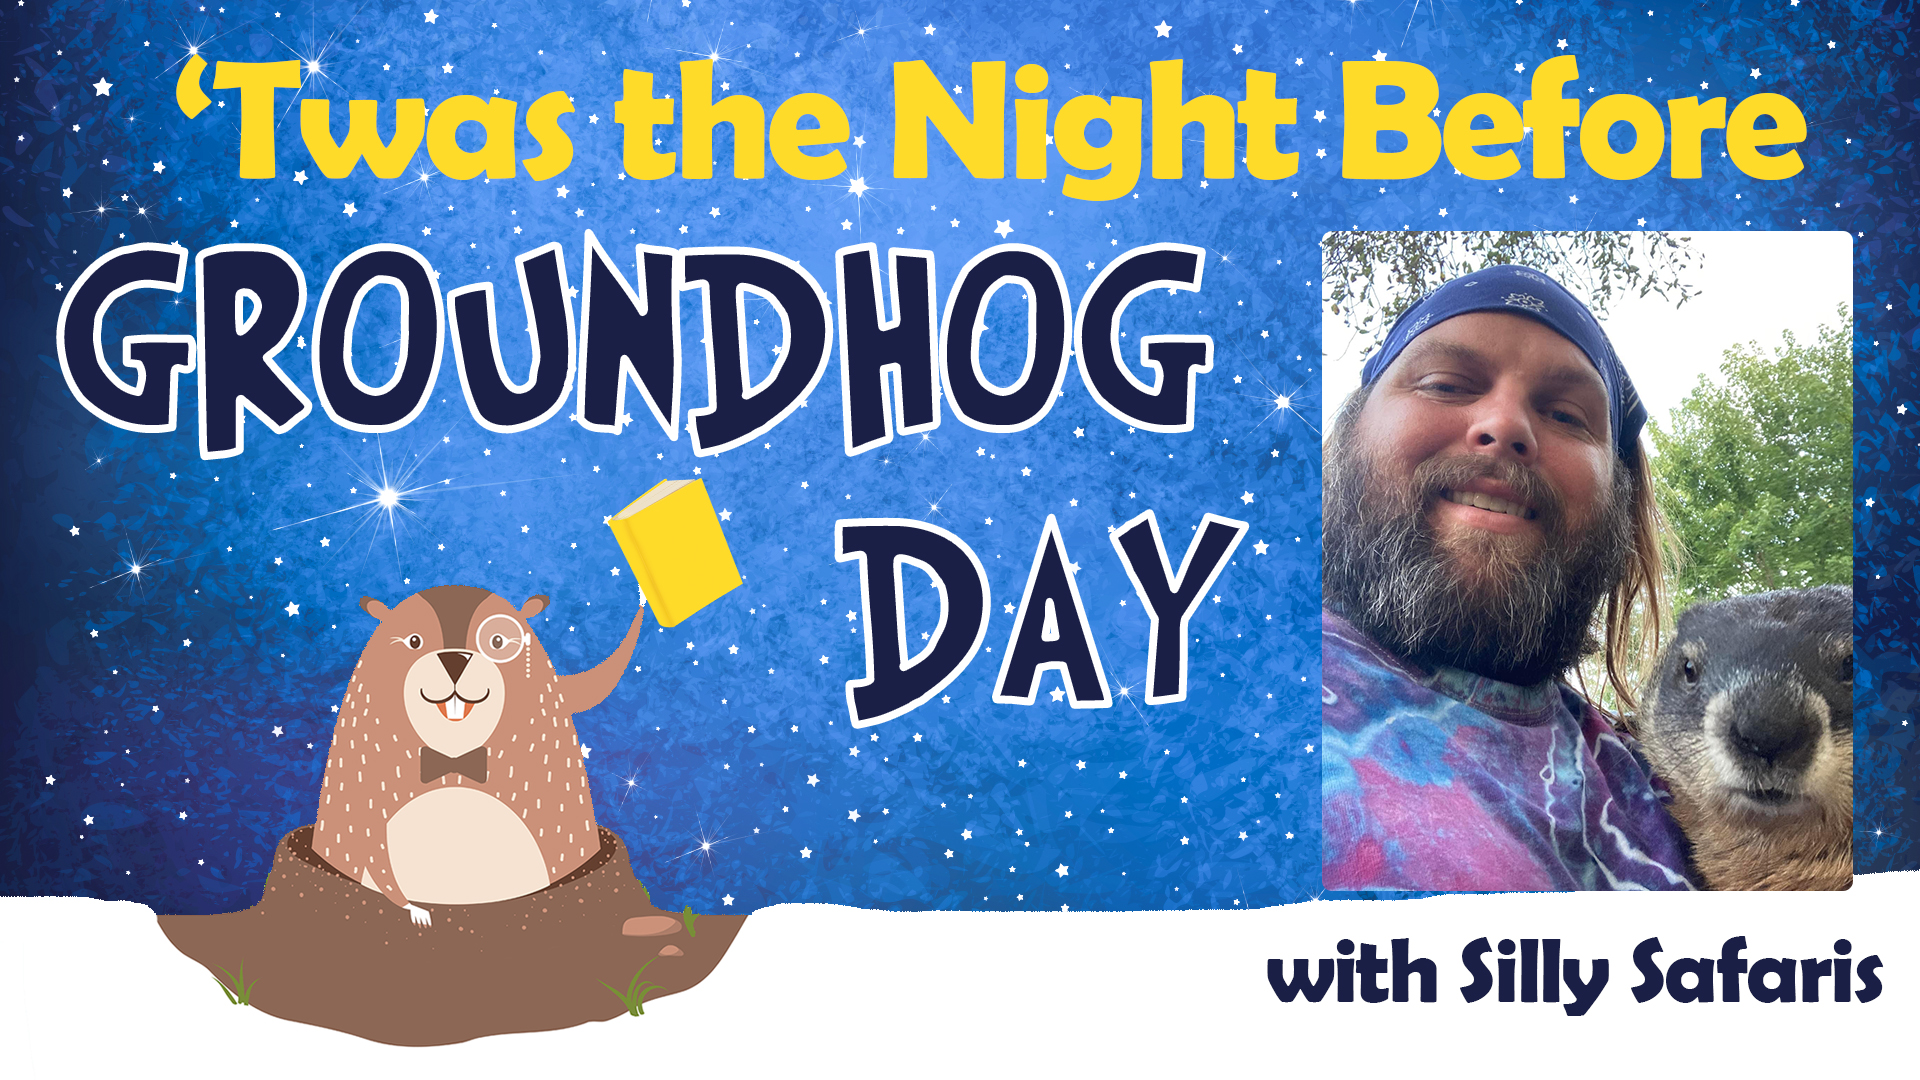 Image reads "Twas the Night Before Groundhog Day with Silly Safaris" against a blue starry night background. A groundhog holding a book is to the left of the image and an image of a funologist and Willie the groundhog are to the right of the image.